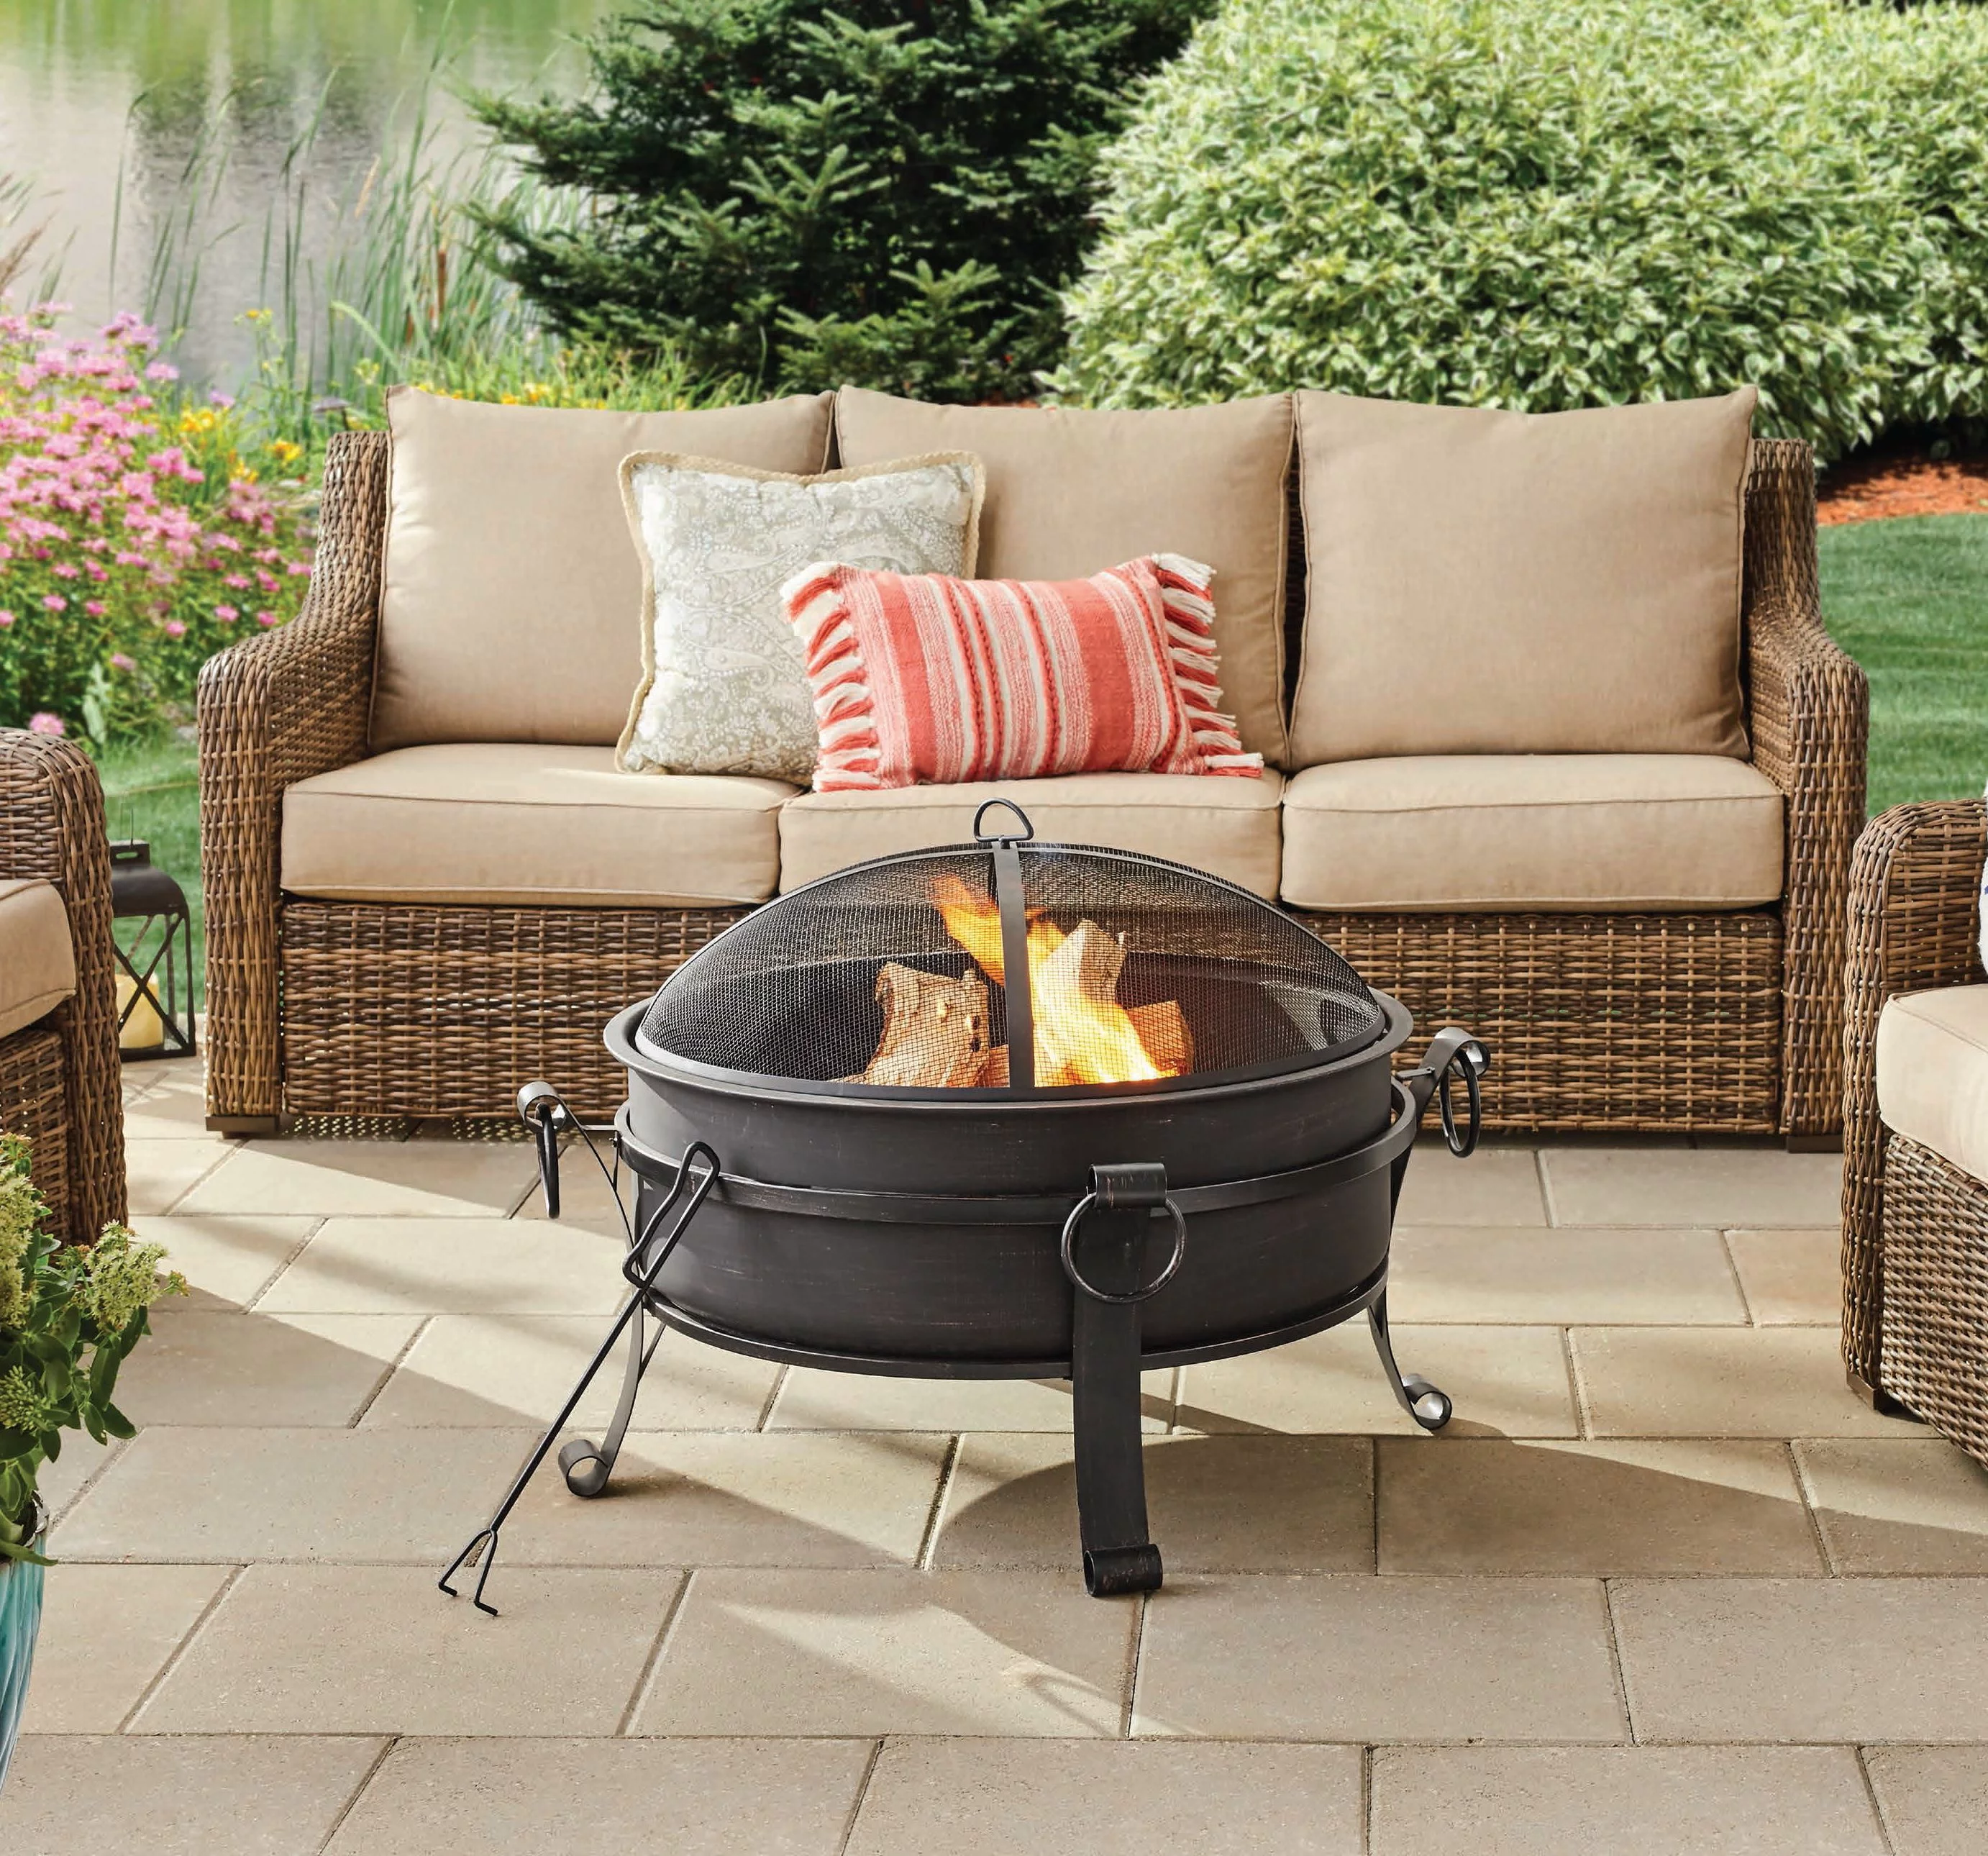 Better Homes & Gardens 30 Fire Pit & Table, Antique Bronze Finish